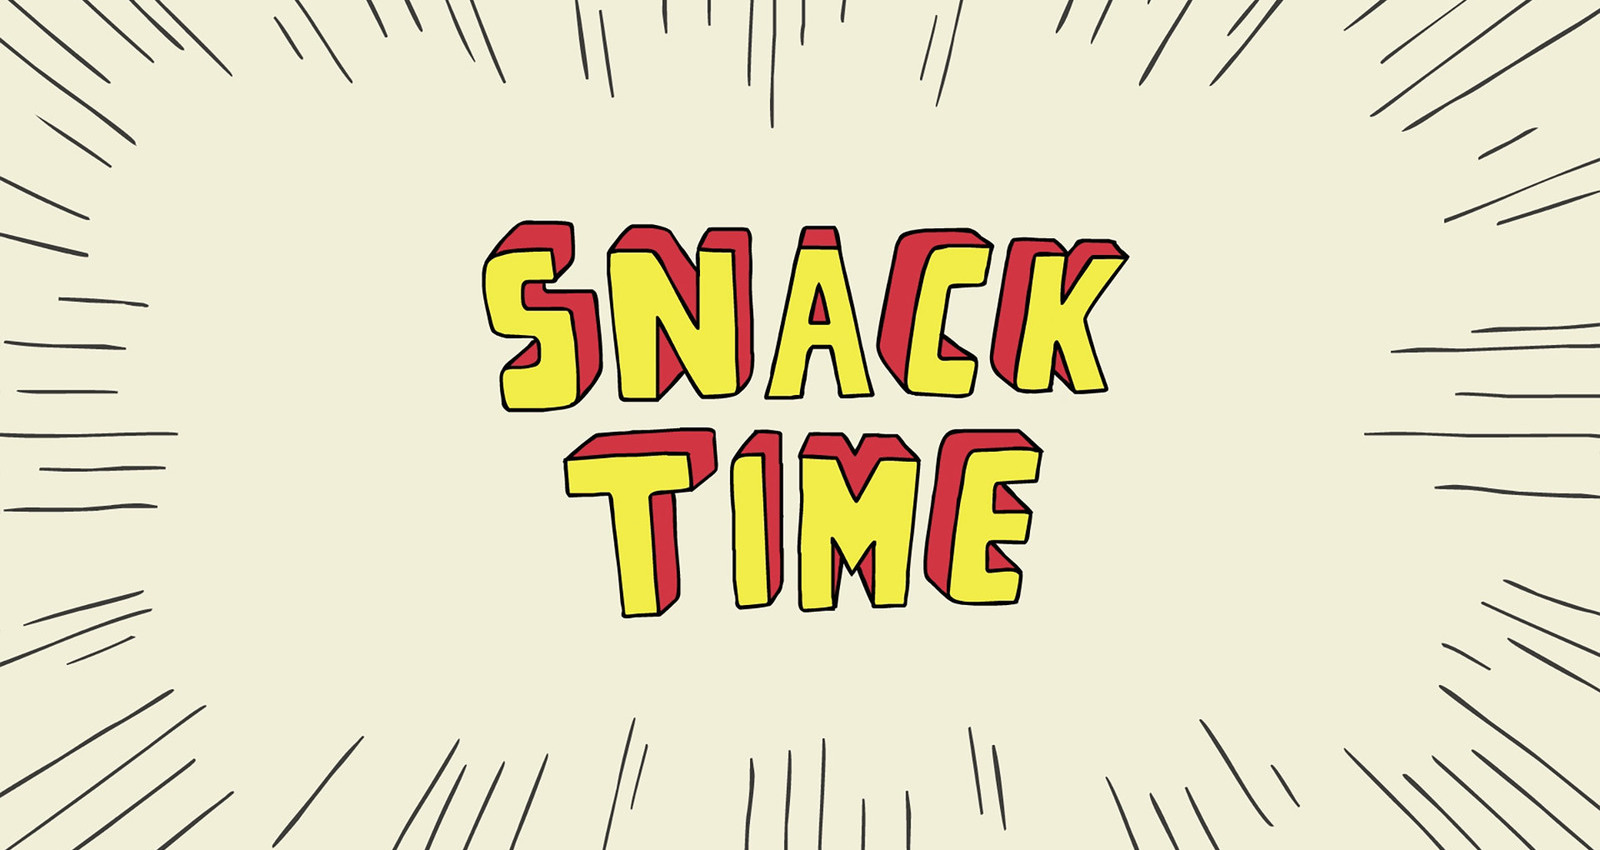 Snack Time